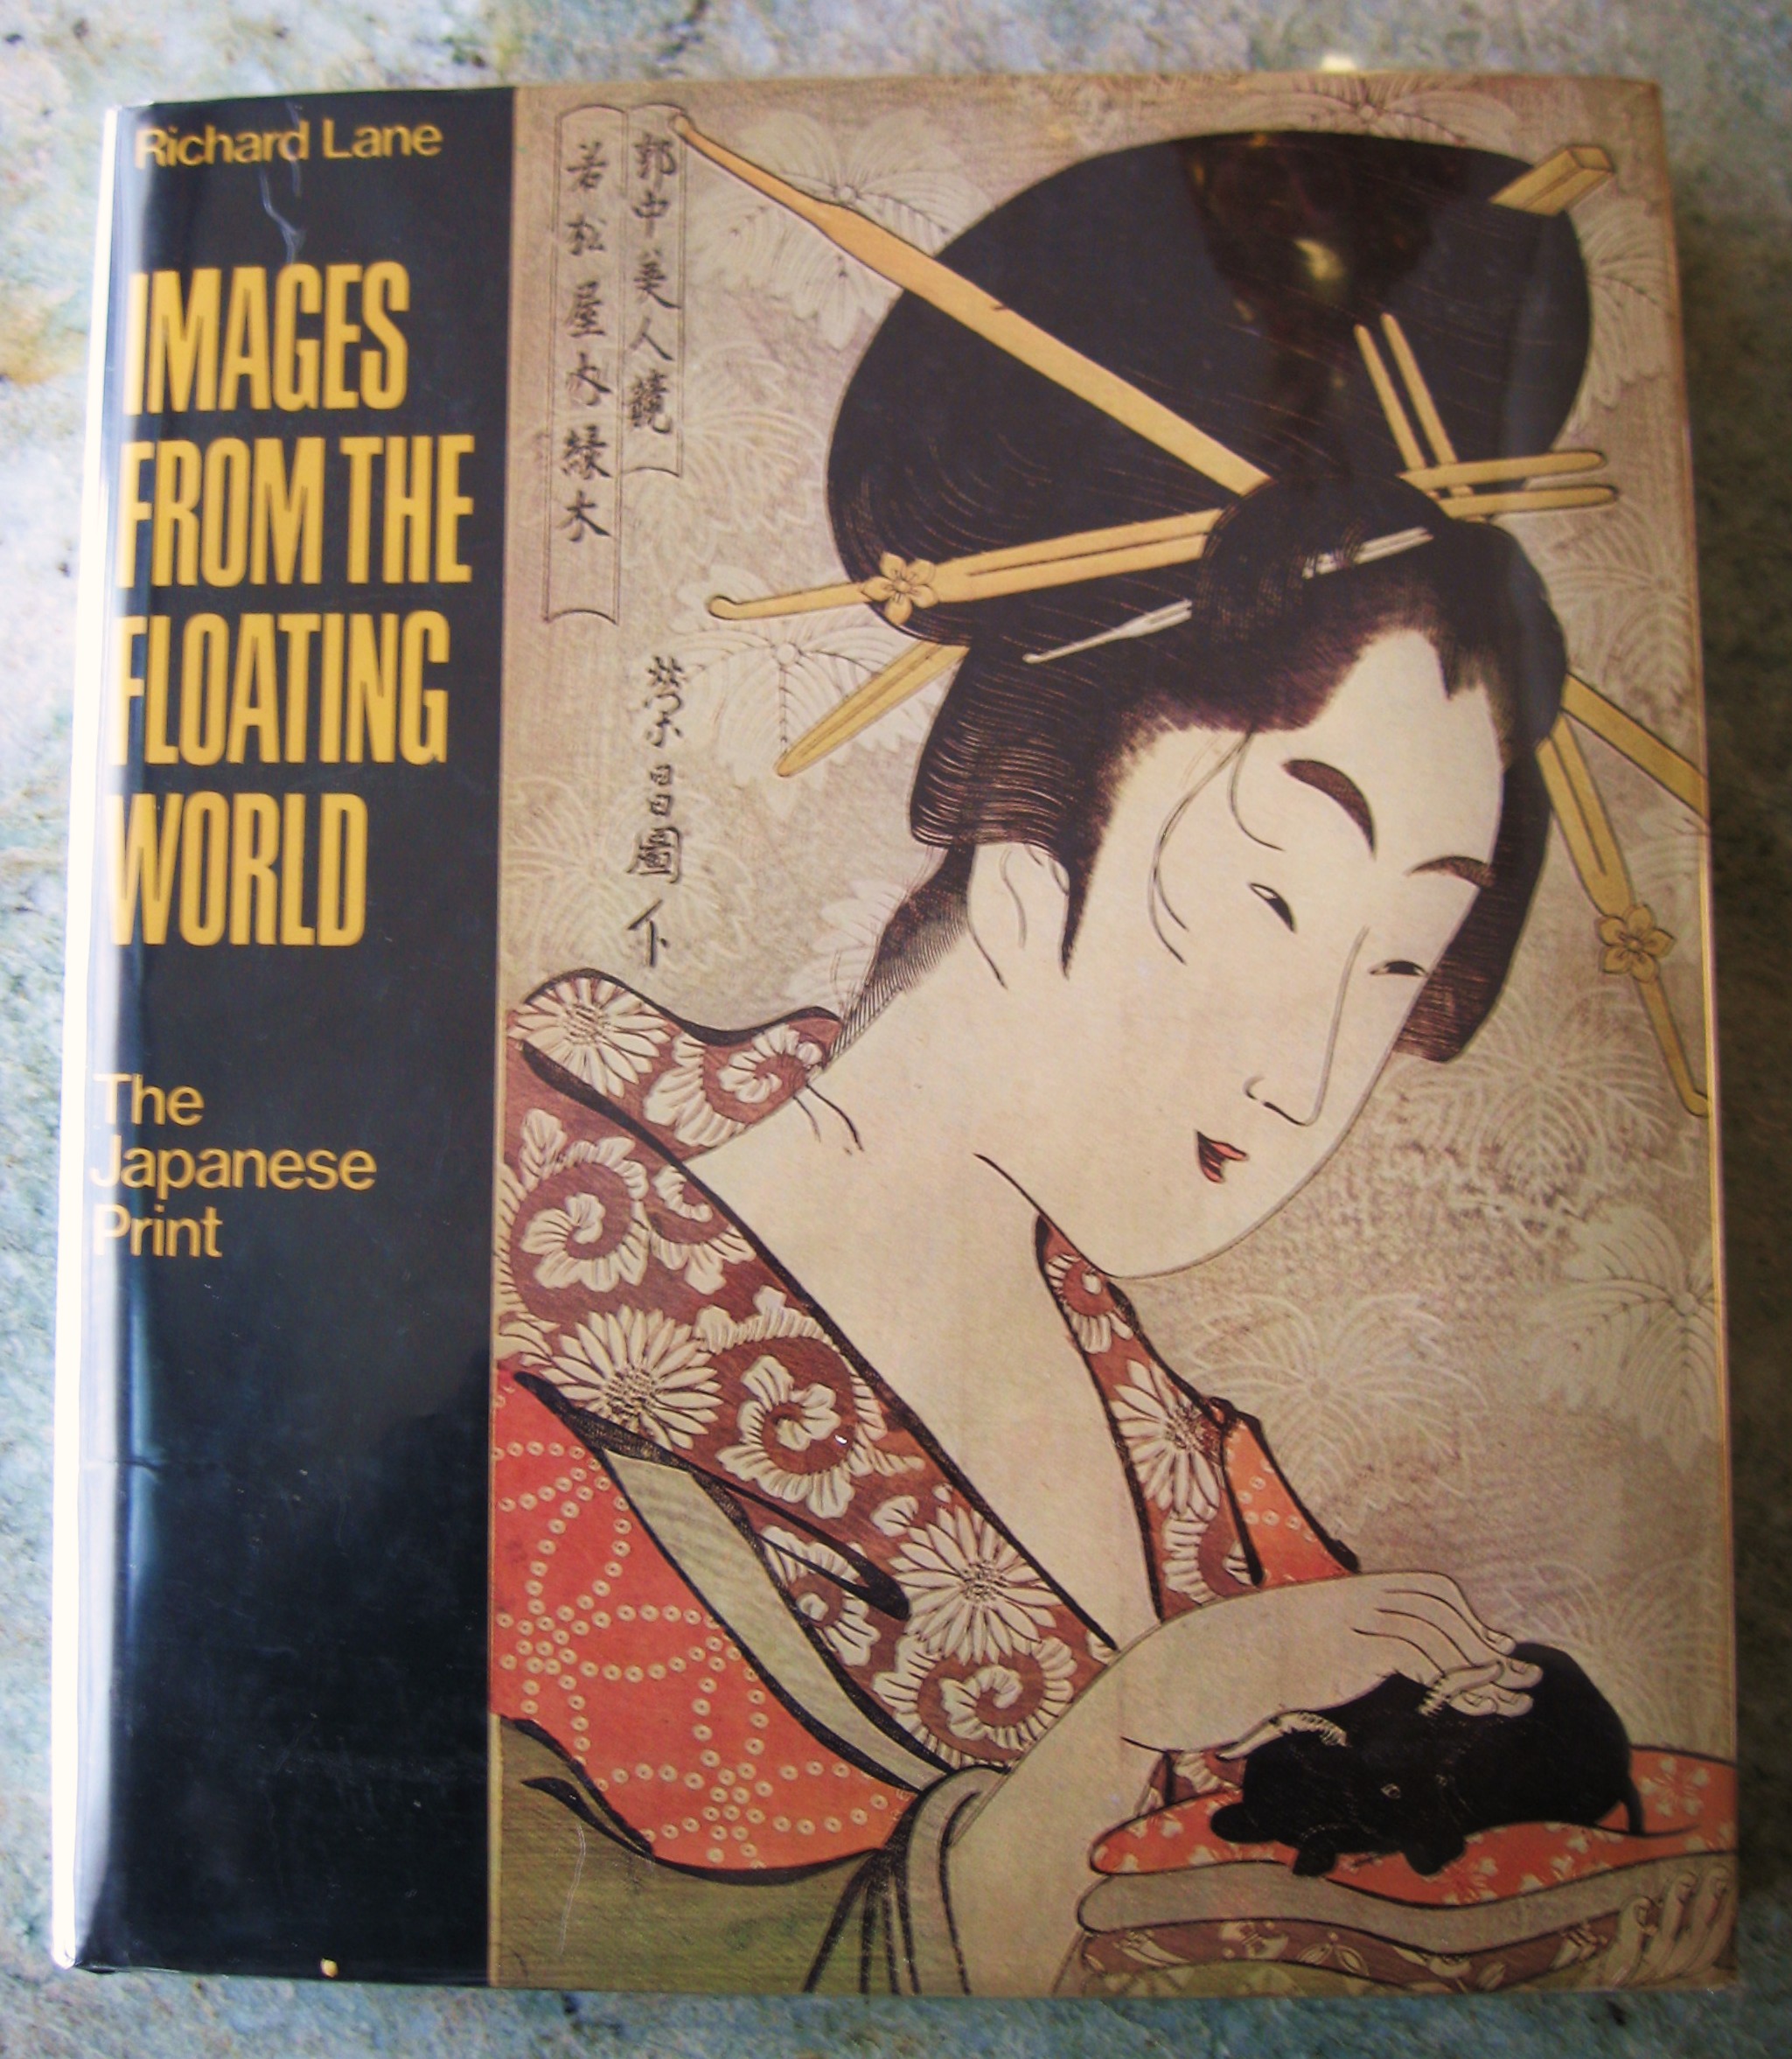 Images From The Floating World